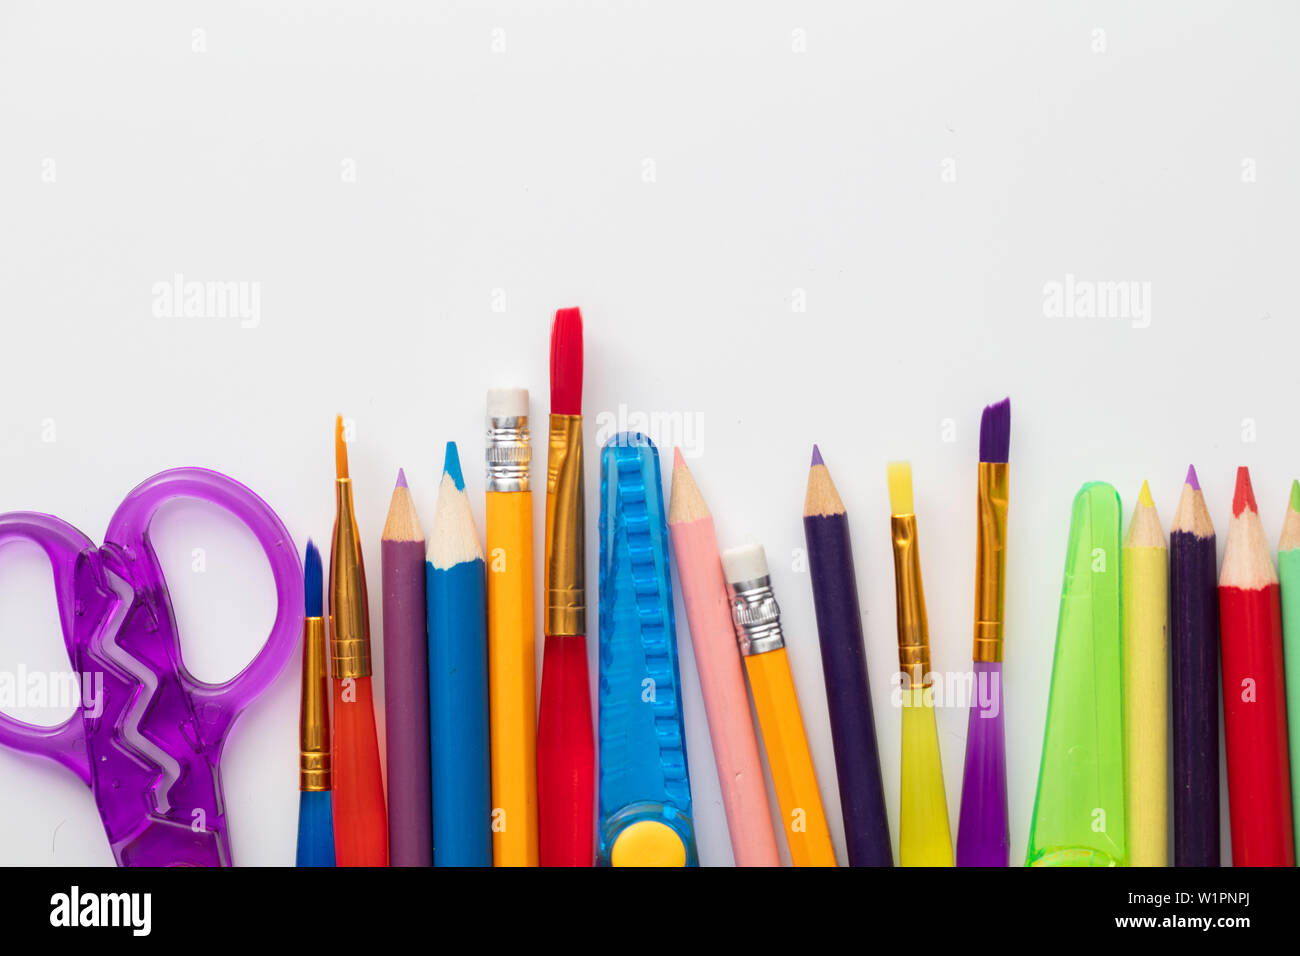 Row of school art and craft supplies on a white background Stock Photo -  Alamy